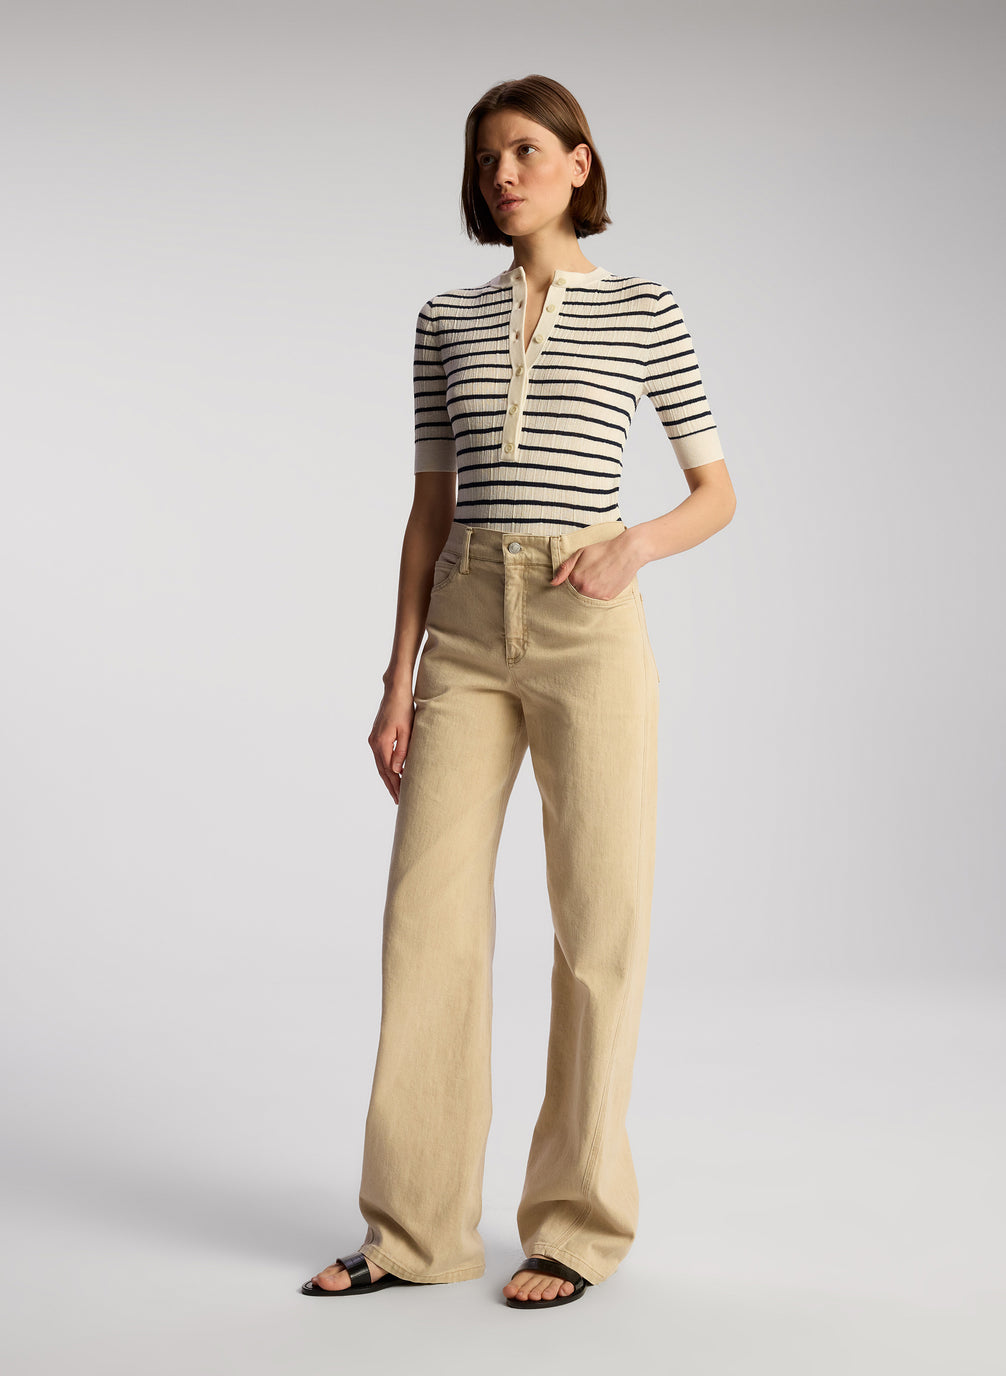 side view of woman wearing navy blue and white striped shirt and tan pants